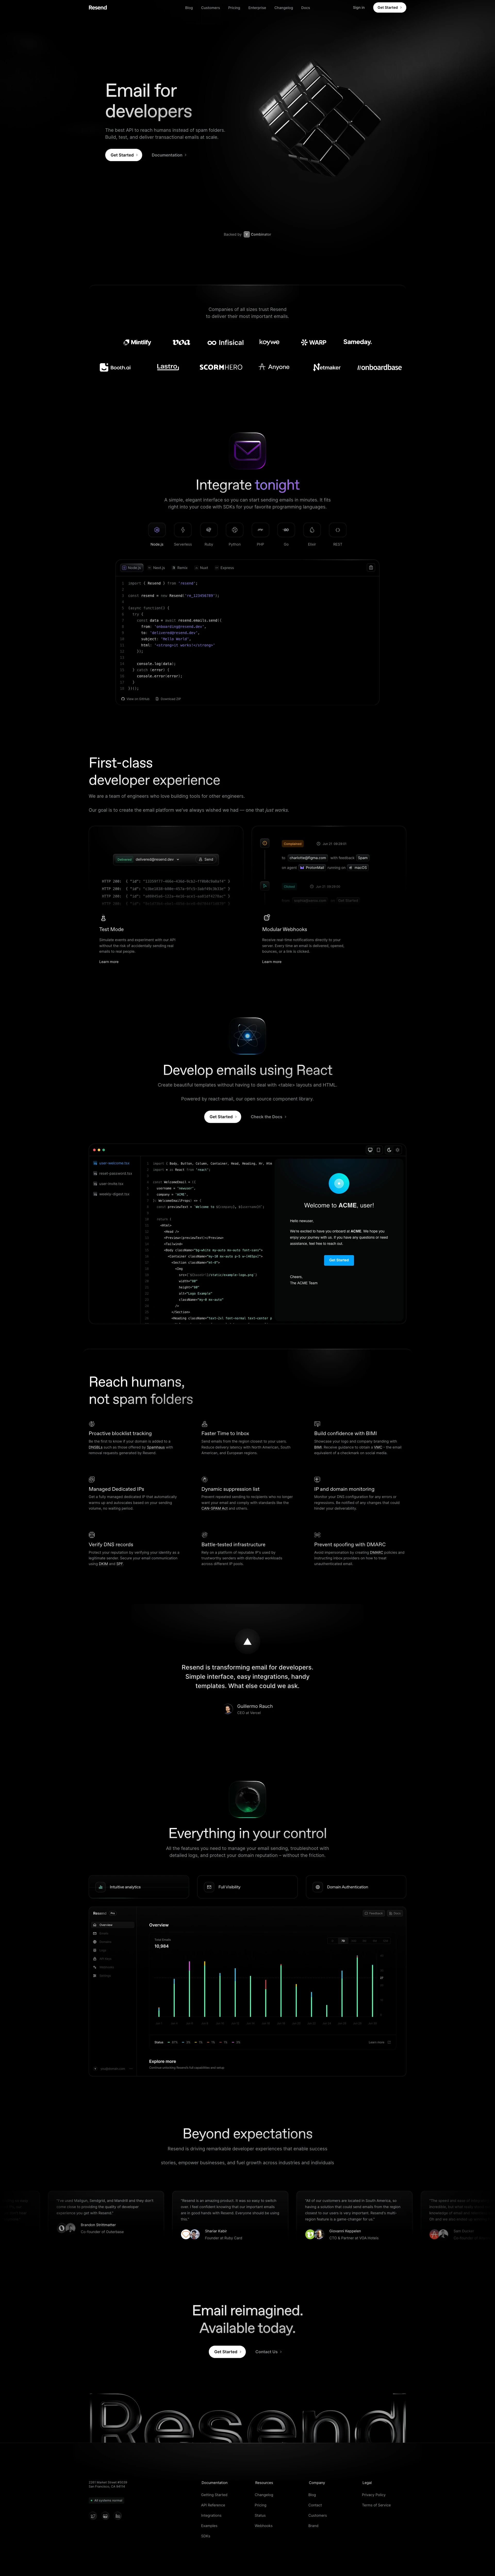 Resend Landing Page Example: Email for developers. The best API to reach humans instead of spam folders. Build, test, and deliver transactional emails at scale.